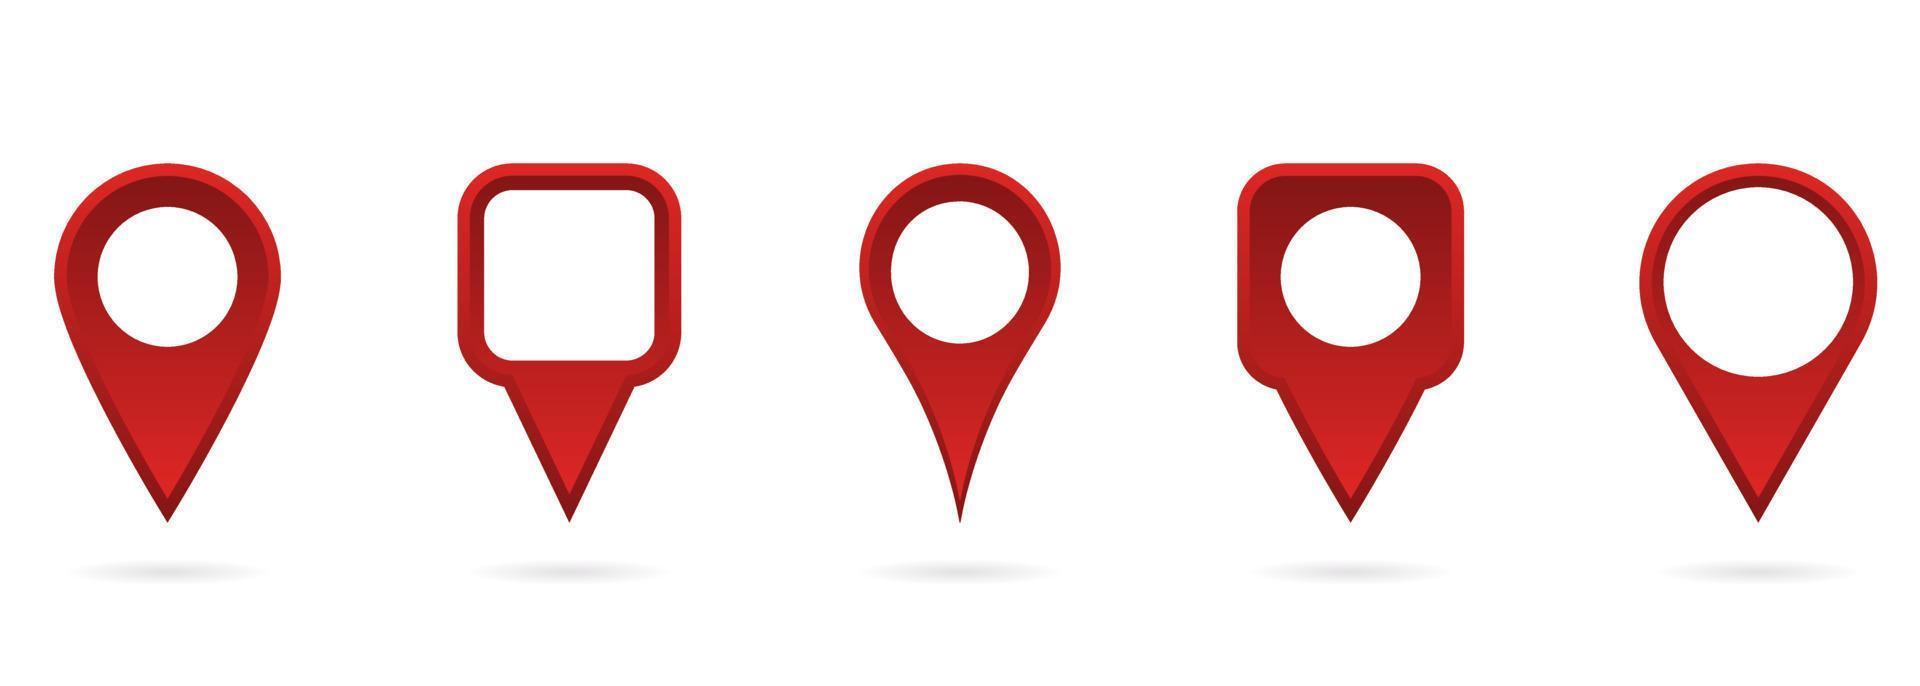 Red Location Pointer Set on White Background. Red GPS Tag and Thumbtack Sign Collection. Map Marker Points Icon. Pointer Navigation Symbol. Isolated Vector Illustration.